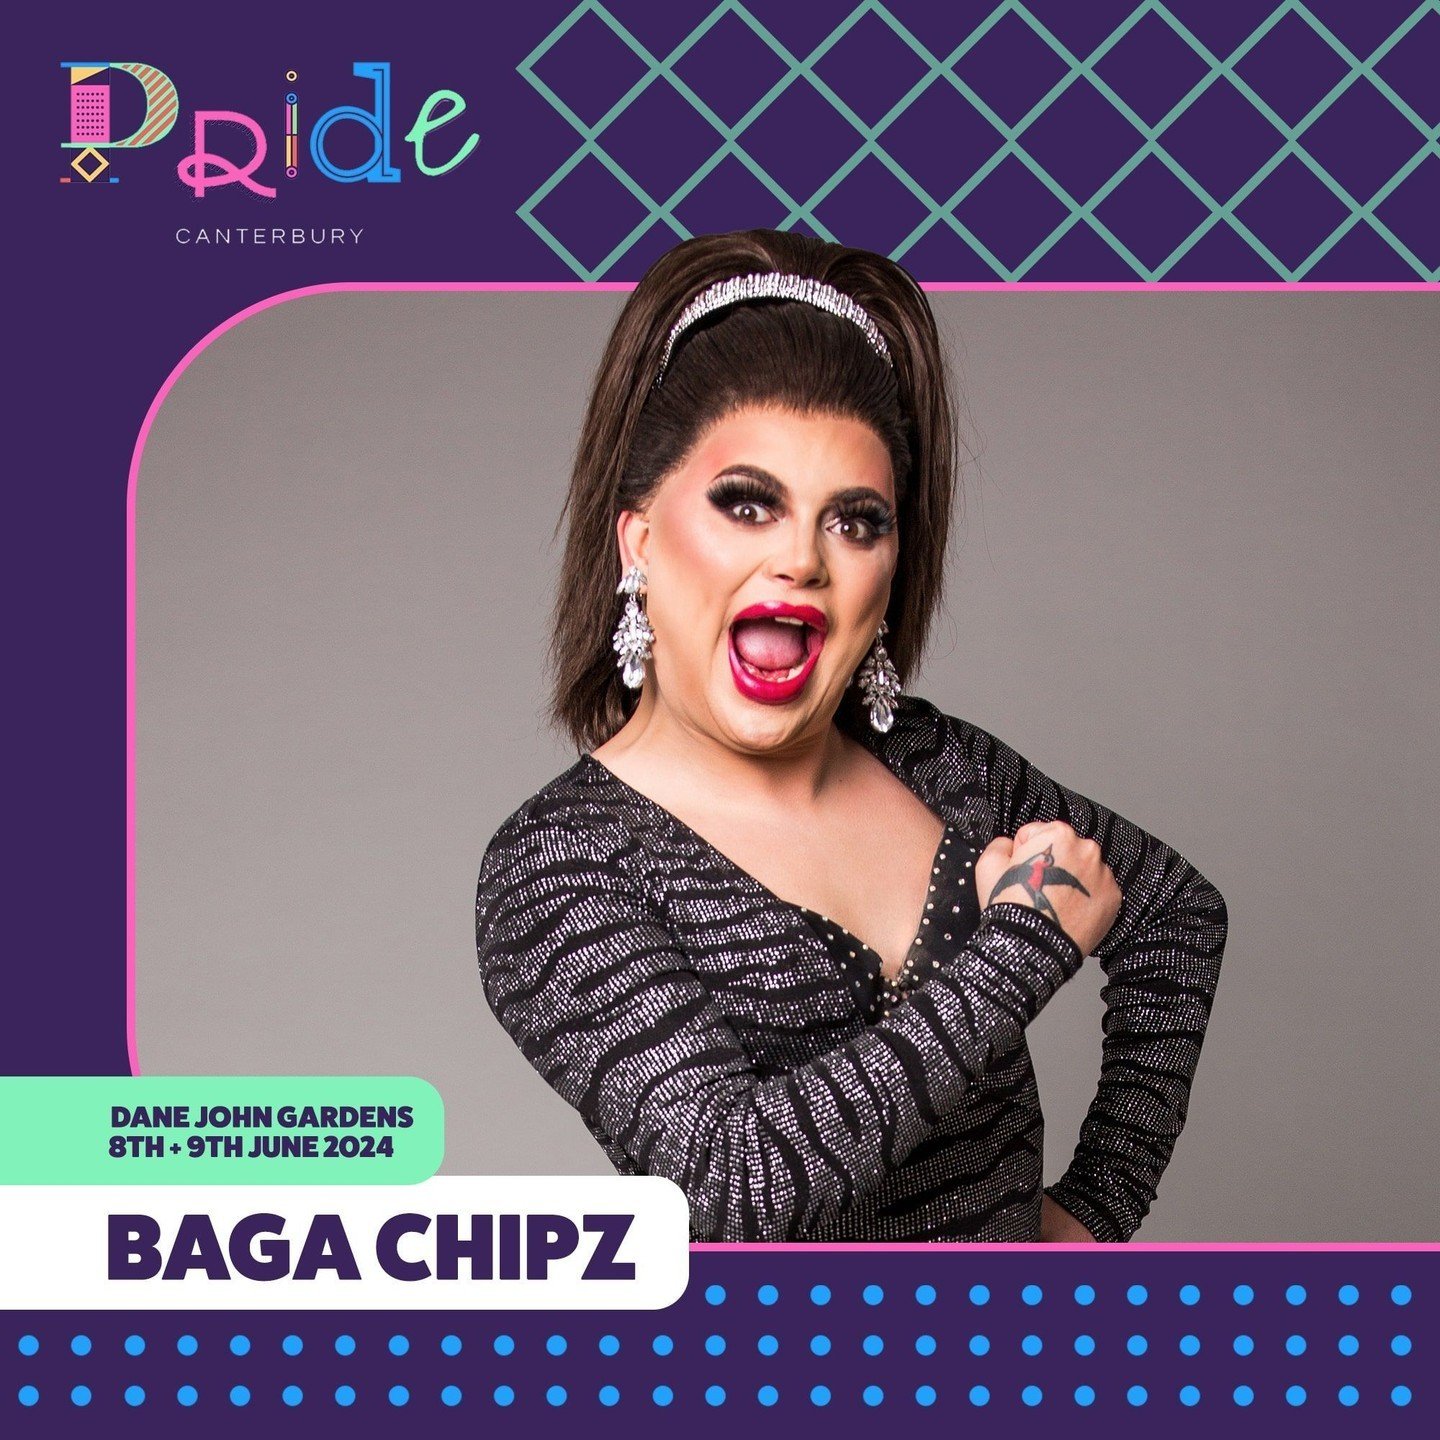 📢 Pride Canterbury 2024 line-up Announcement! 

@bagachipz
A Pride Canterbury and RuPaul's Drag Race UK legend - Baga Chipz is back on our main stage.

Booty Luv 
Booty Luv are 00's pop legends and they'll be performing at Pride.

@kerryellis79
Kerr